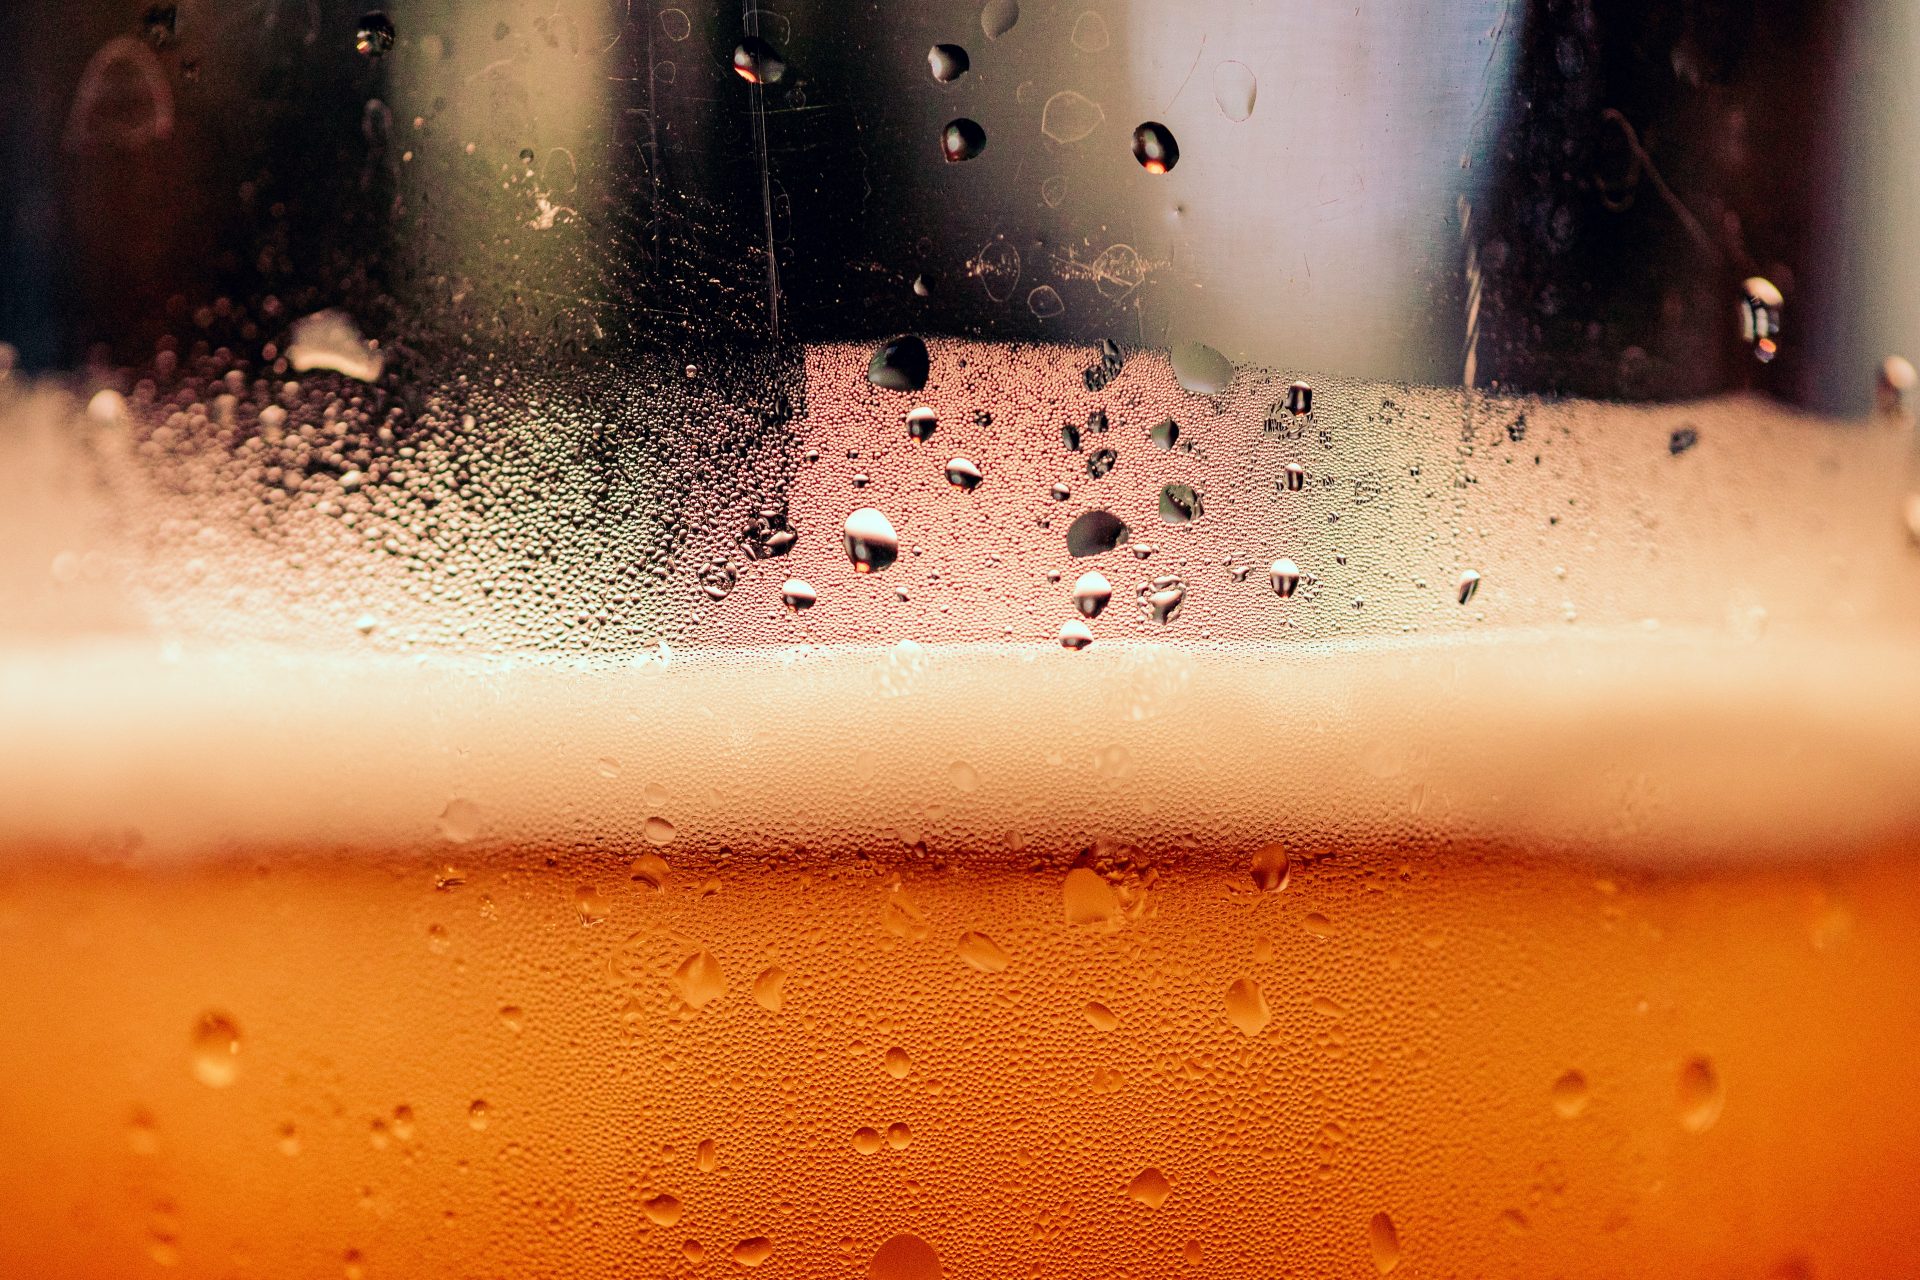 <p>Yes, beer is fermented, but that doesn't mean that guzzling pints is good for your health. Most beers are pasteurized, which kills all bacteria, including the beneficial probiotics. However, some contain live bacteria, and studies have shown moderate consumption could boost gut microbiota. However, that must be balanced with the negative effects of alcohol.</p> <p>Photo: Timothy Dykes/Unsplash</p>